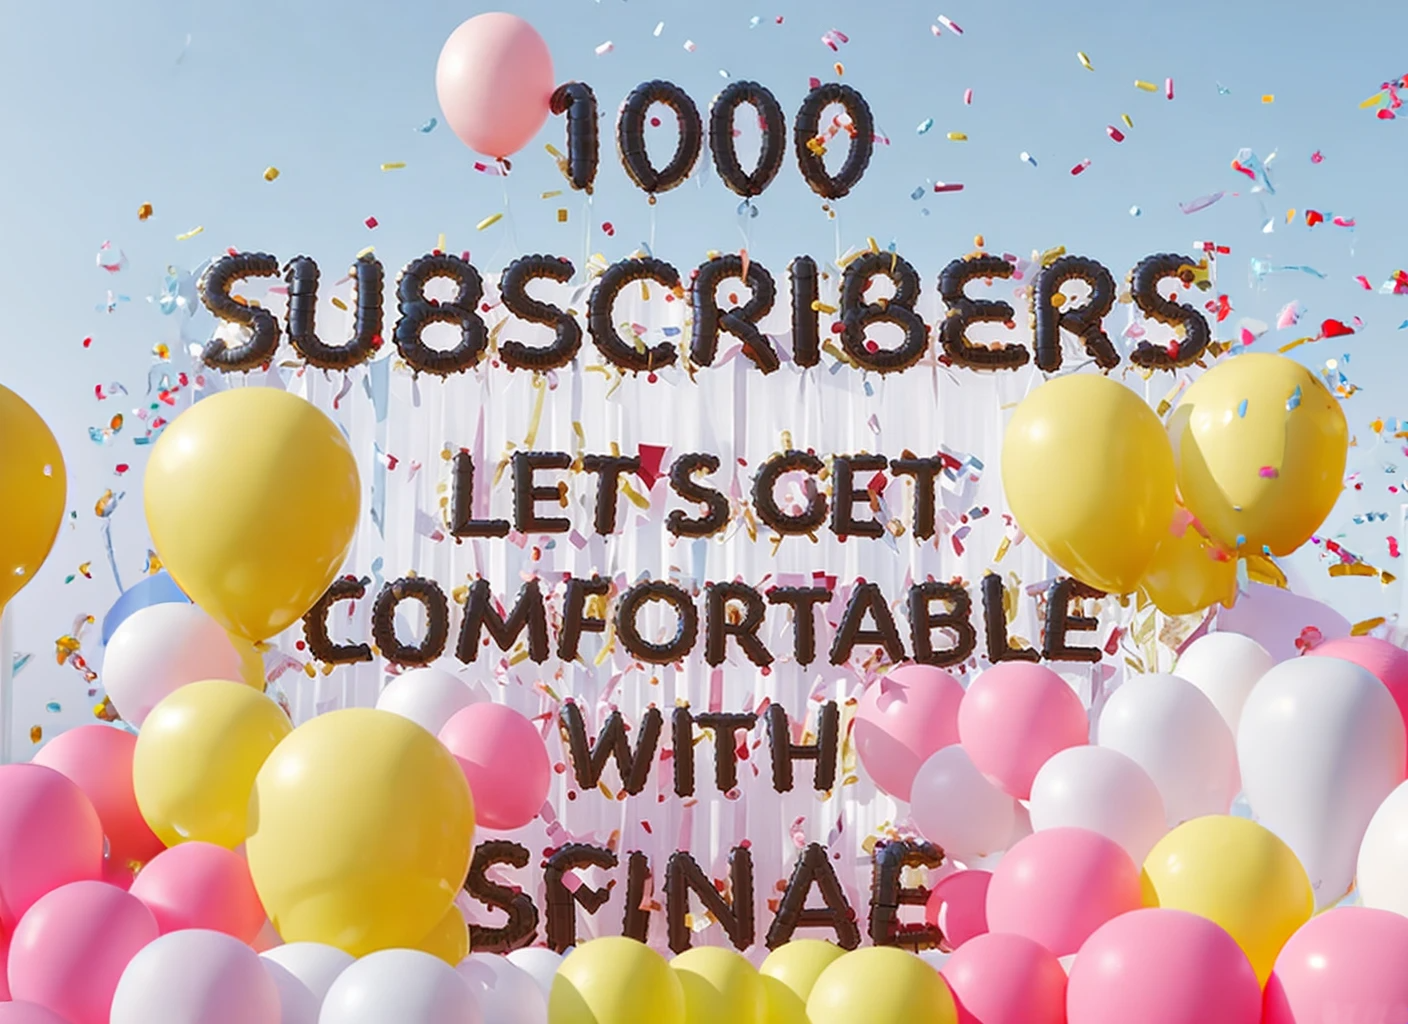 balloons and confetti for 1000 subscribers